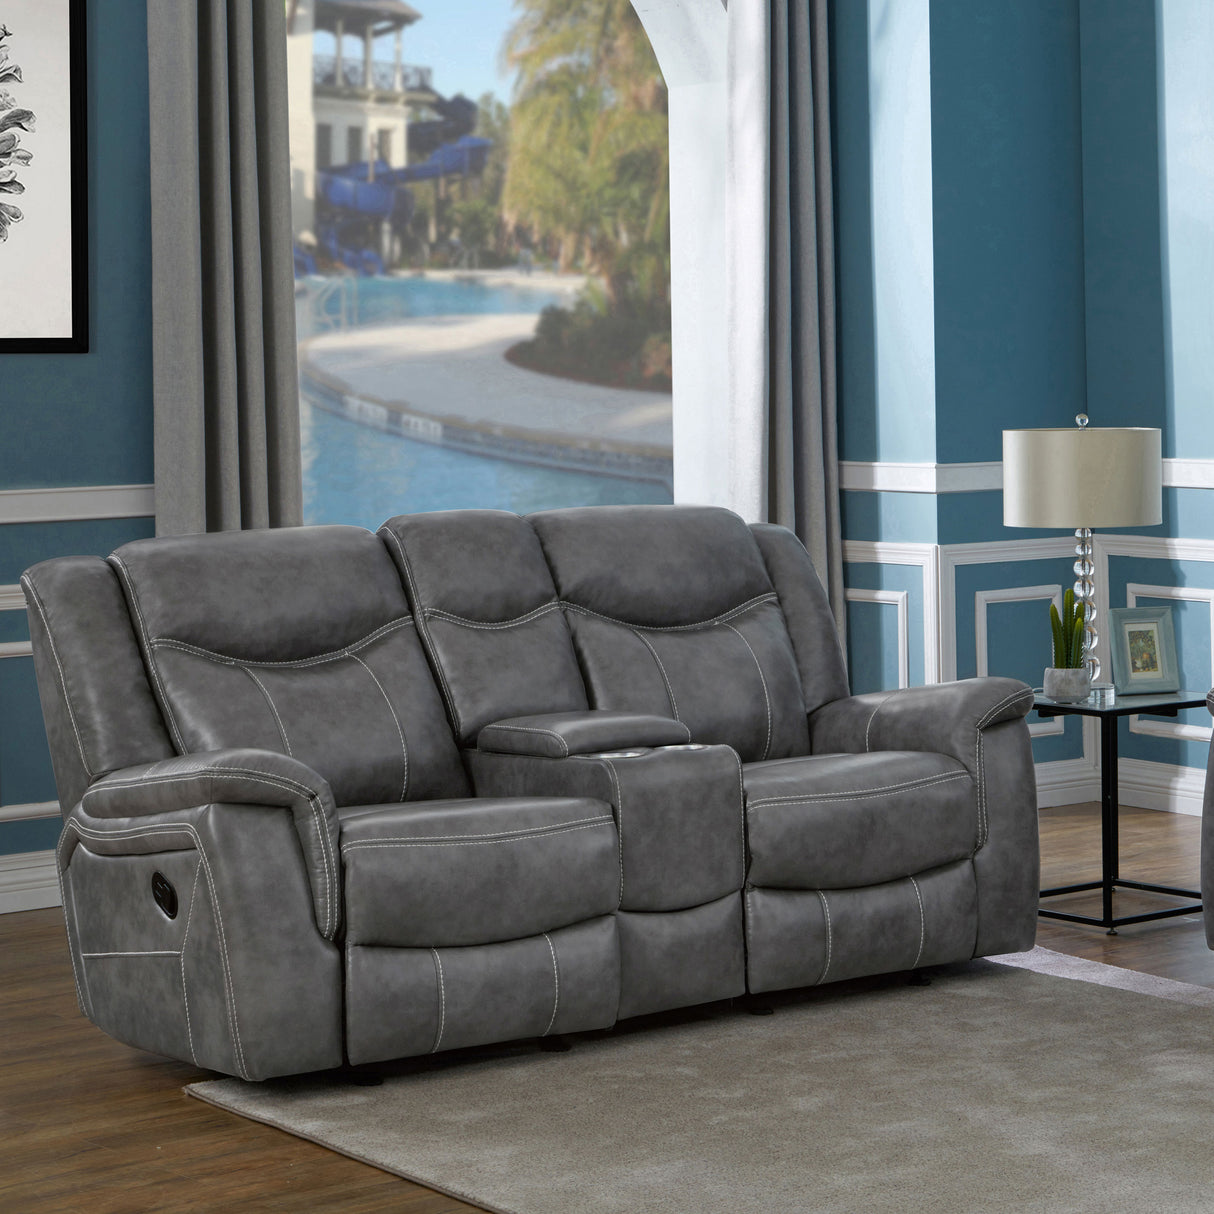 Glider Loveseat W/ Power Outlet - Conrad Upholstered Motion Loveseat Cool Grey